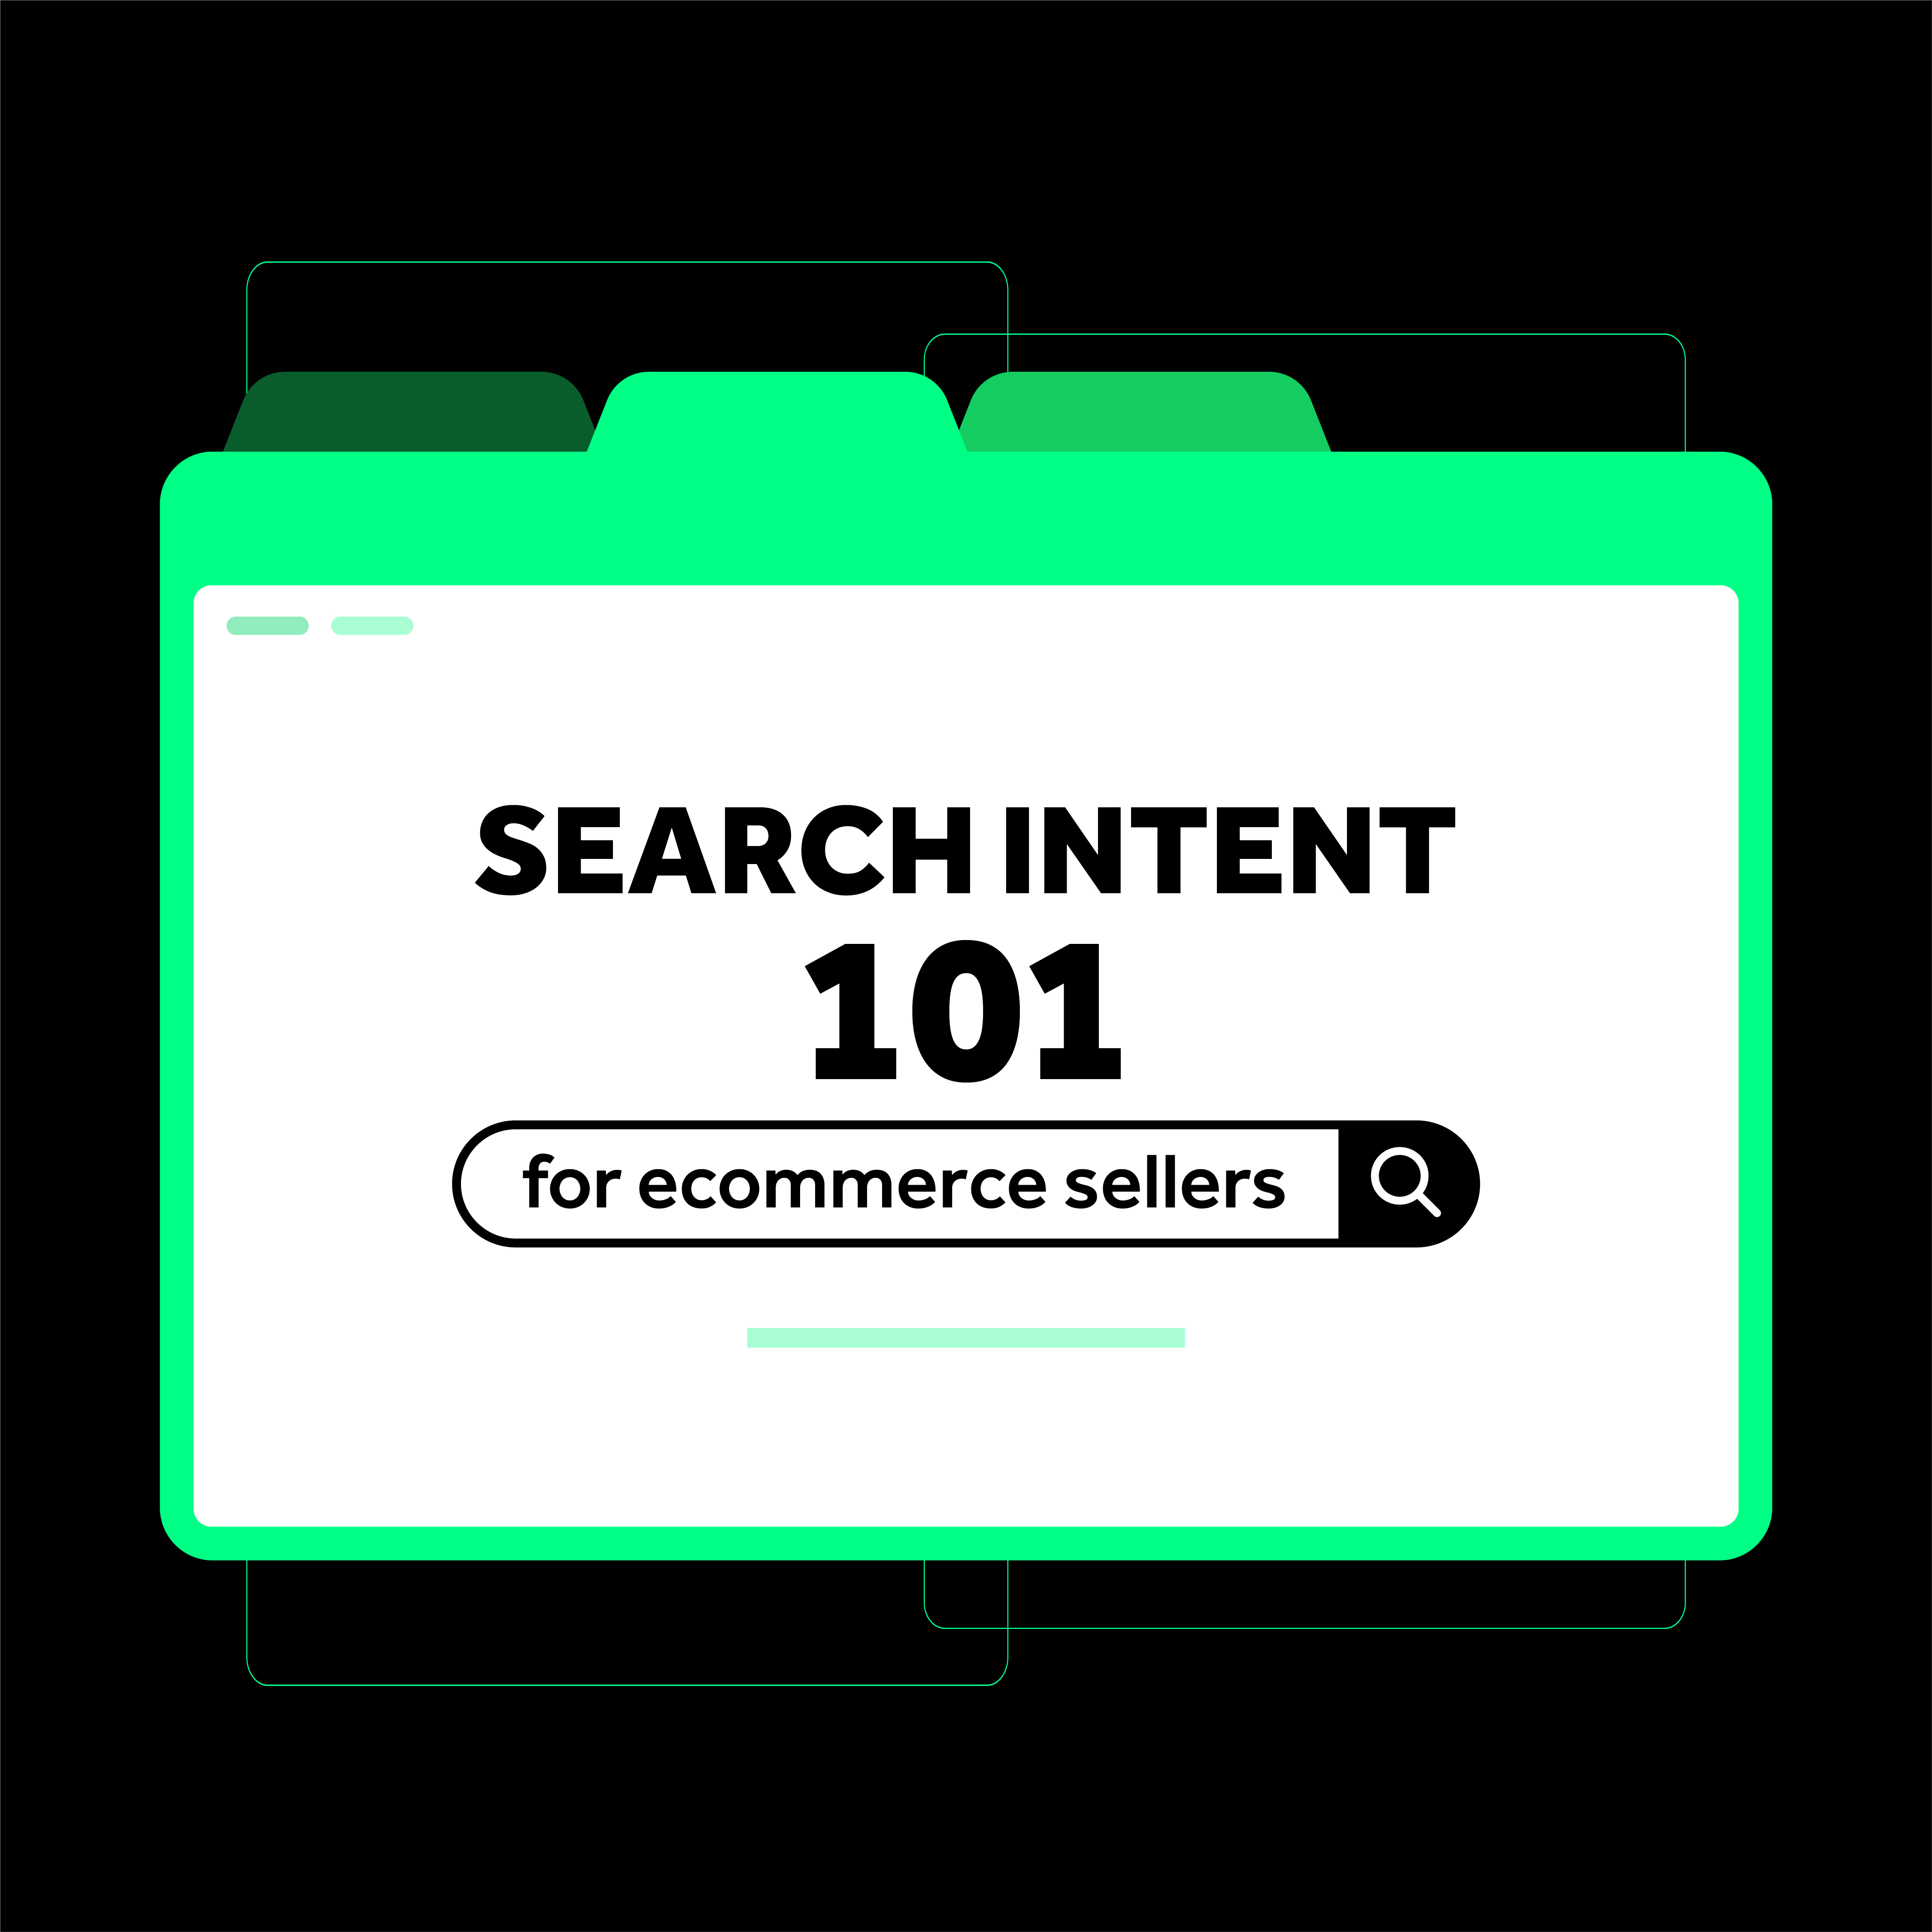 Search Intent 101: What Ecommerce Sellers Need to Know